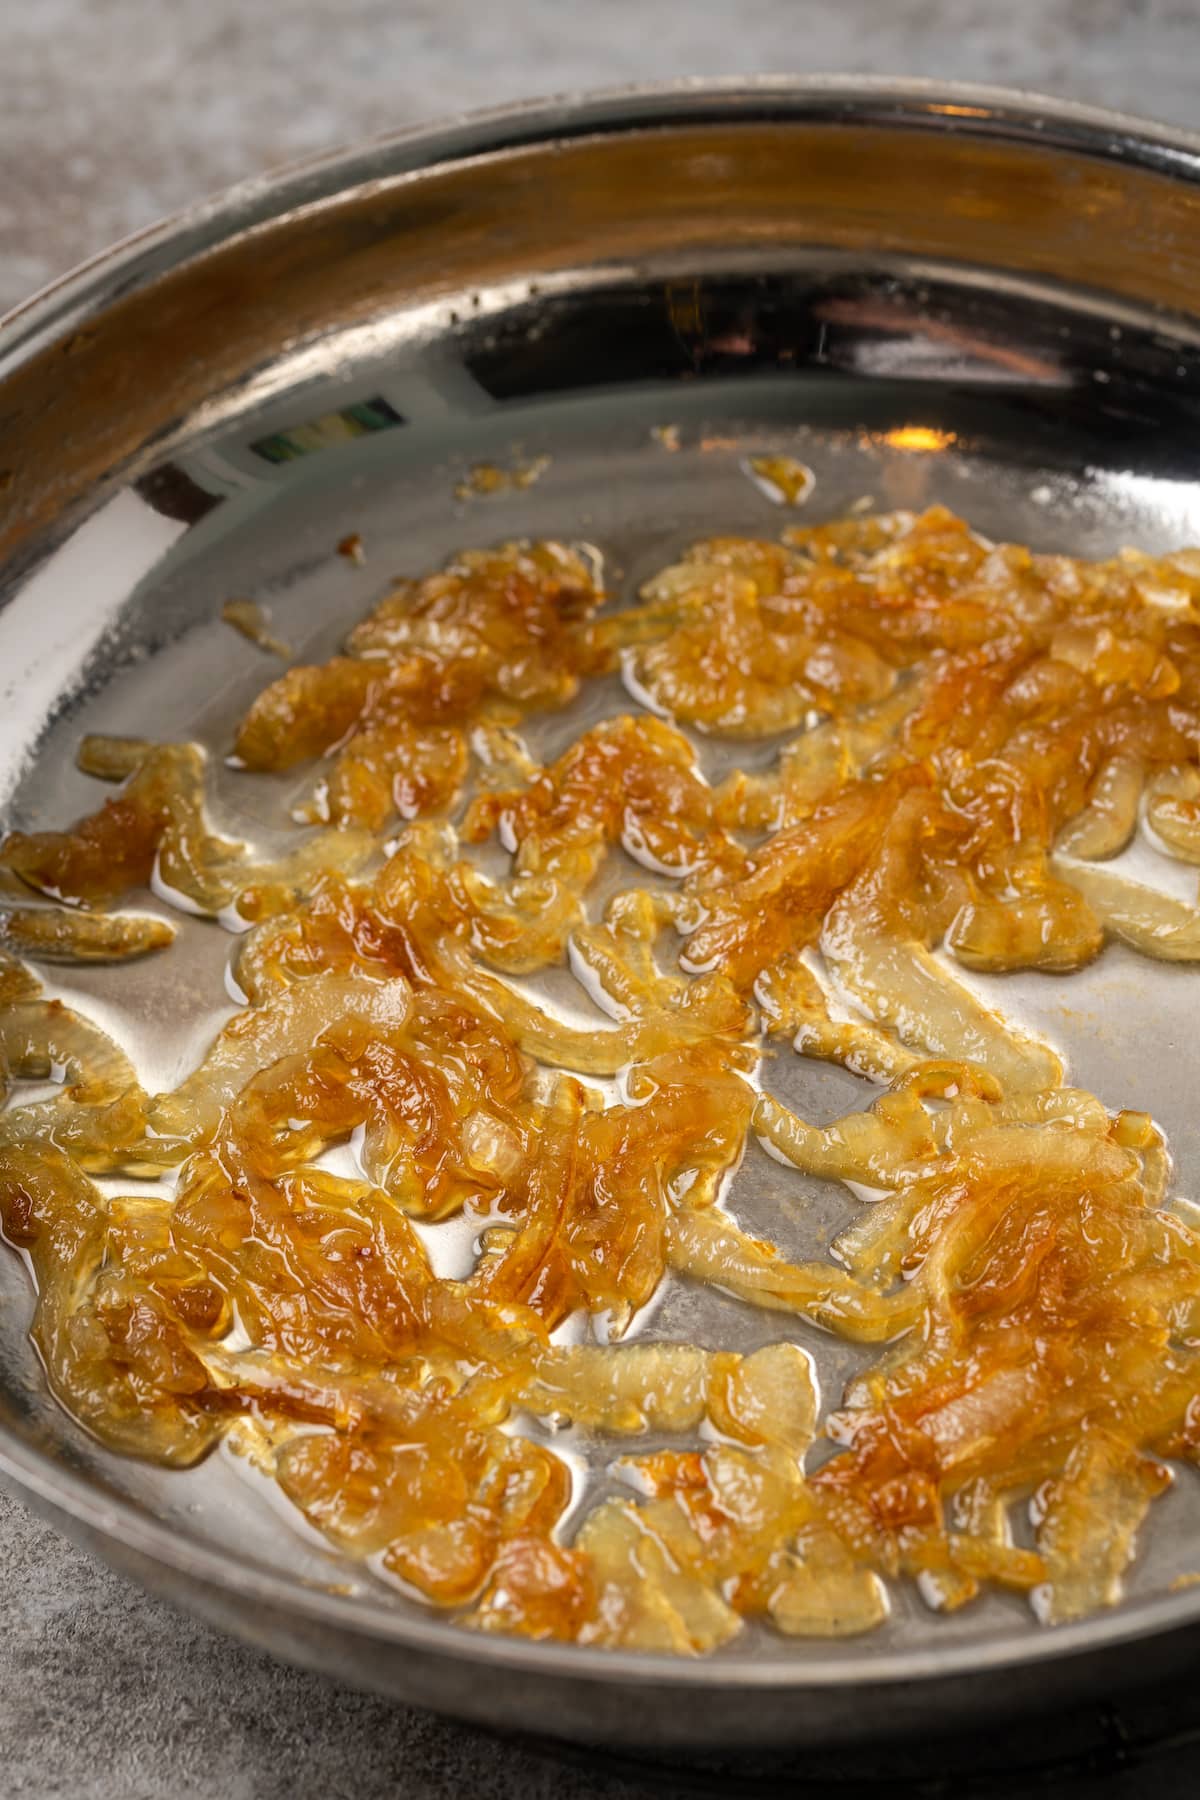 Onion slices caramelizing in a skillet with butter and sugar.